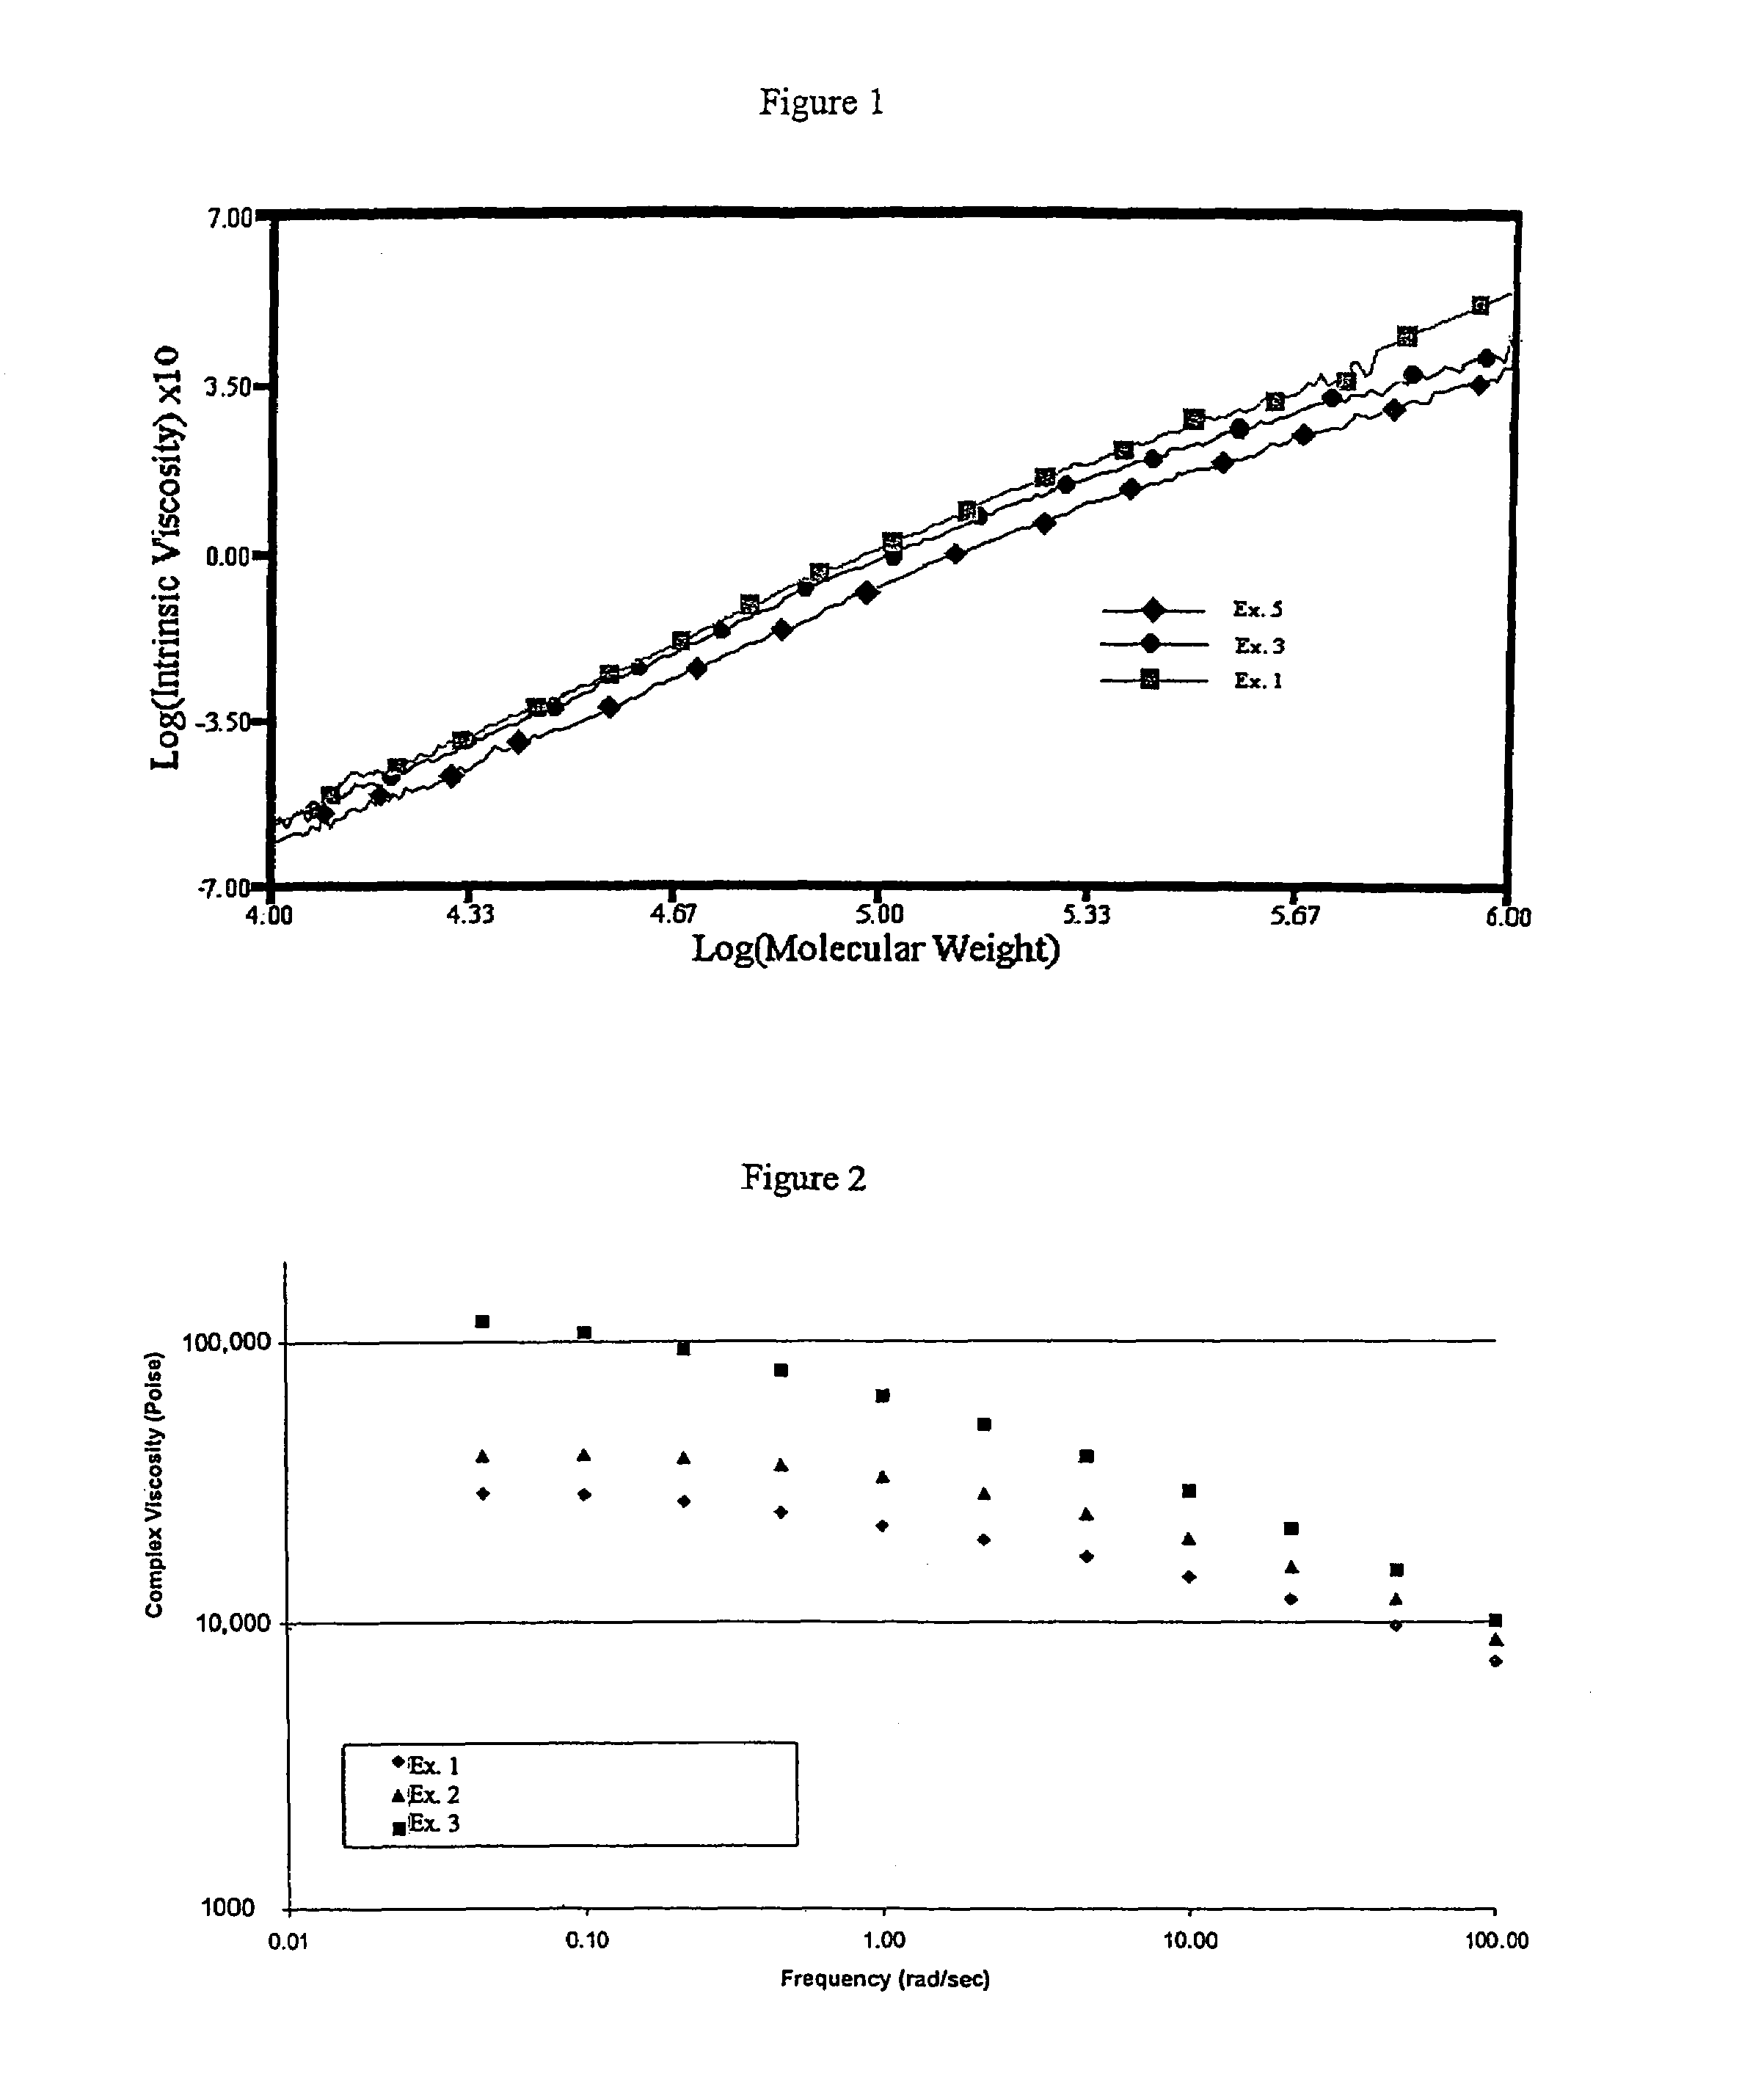 Copolymers of monocyclic esters and carbonates and methods for making same